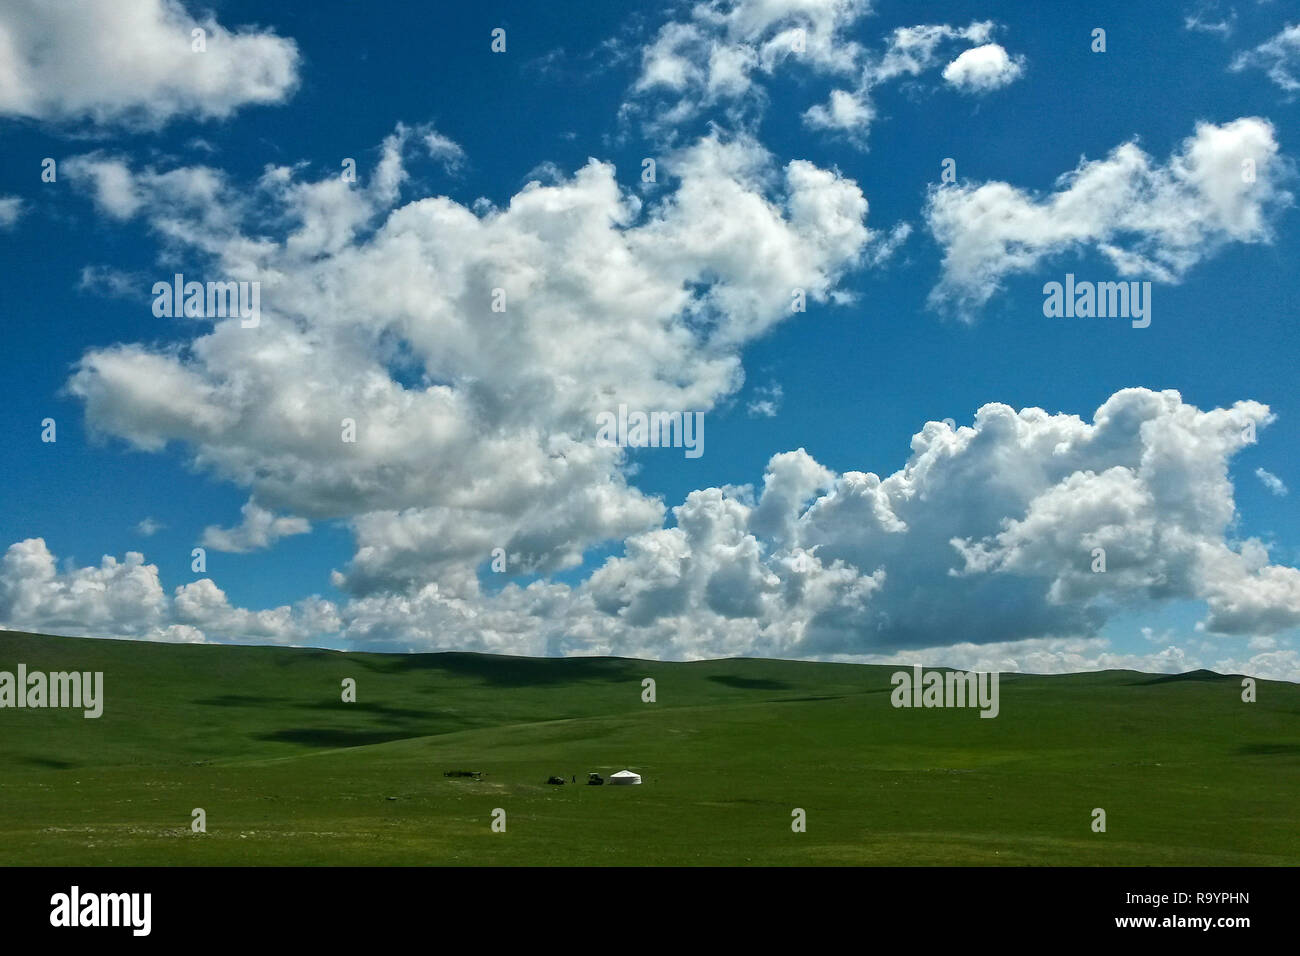 Lonely Mongolian Yurt in wide open steppe countryside under scenic blue sky, Bulgan, Mongolia Stock Photo